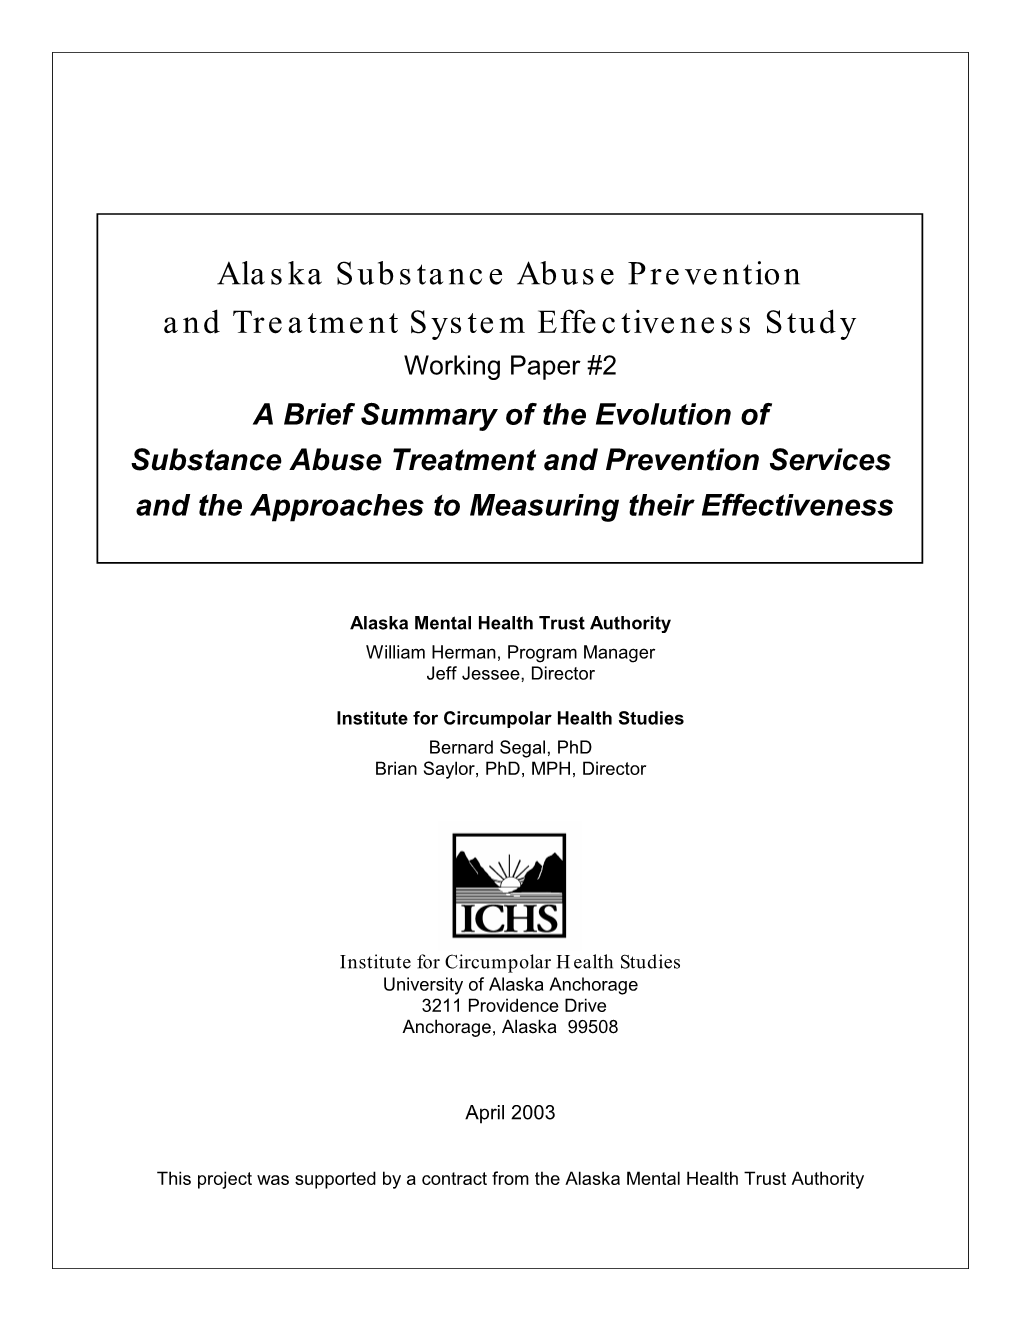 Alaska Substance Abuse Prevention and Treatment System Effectiveness Study Working Paper #2